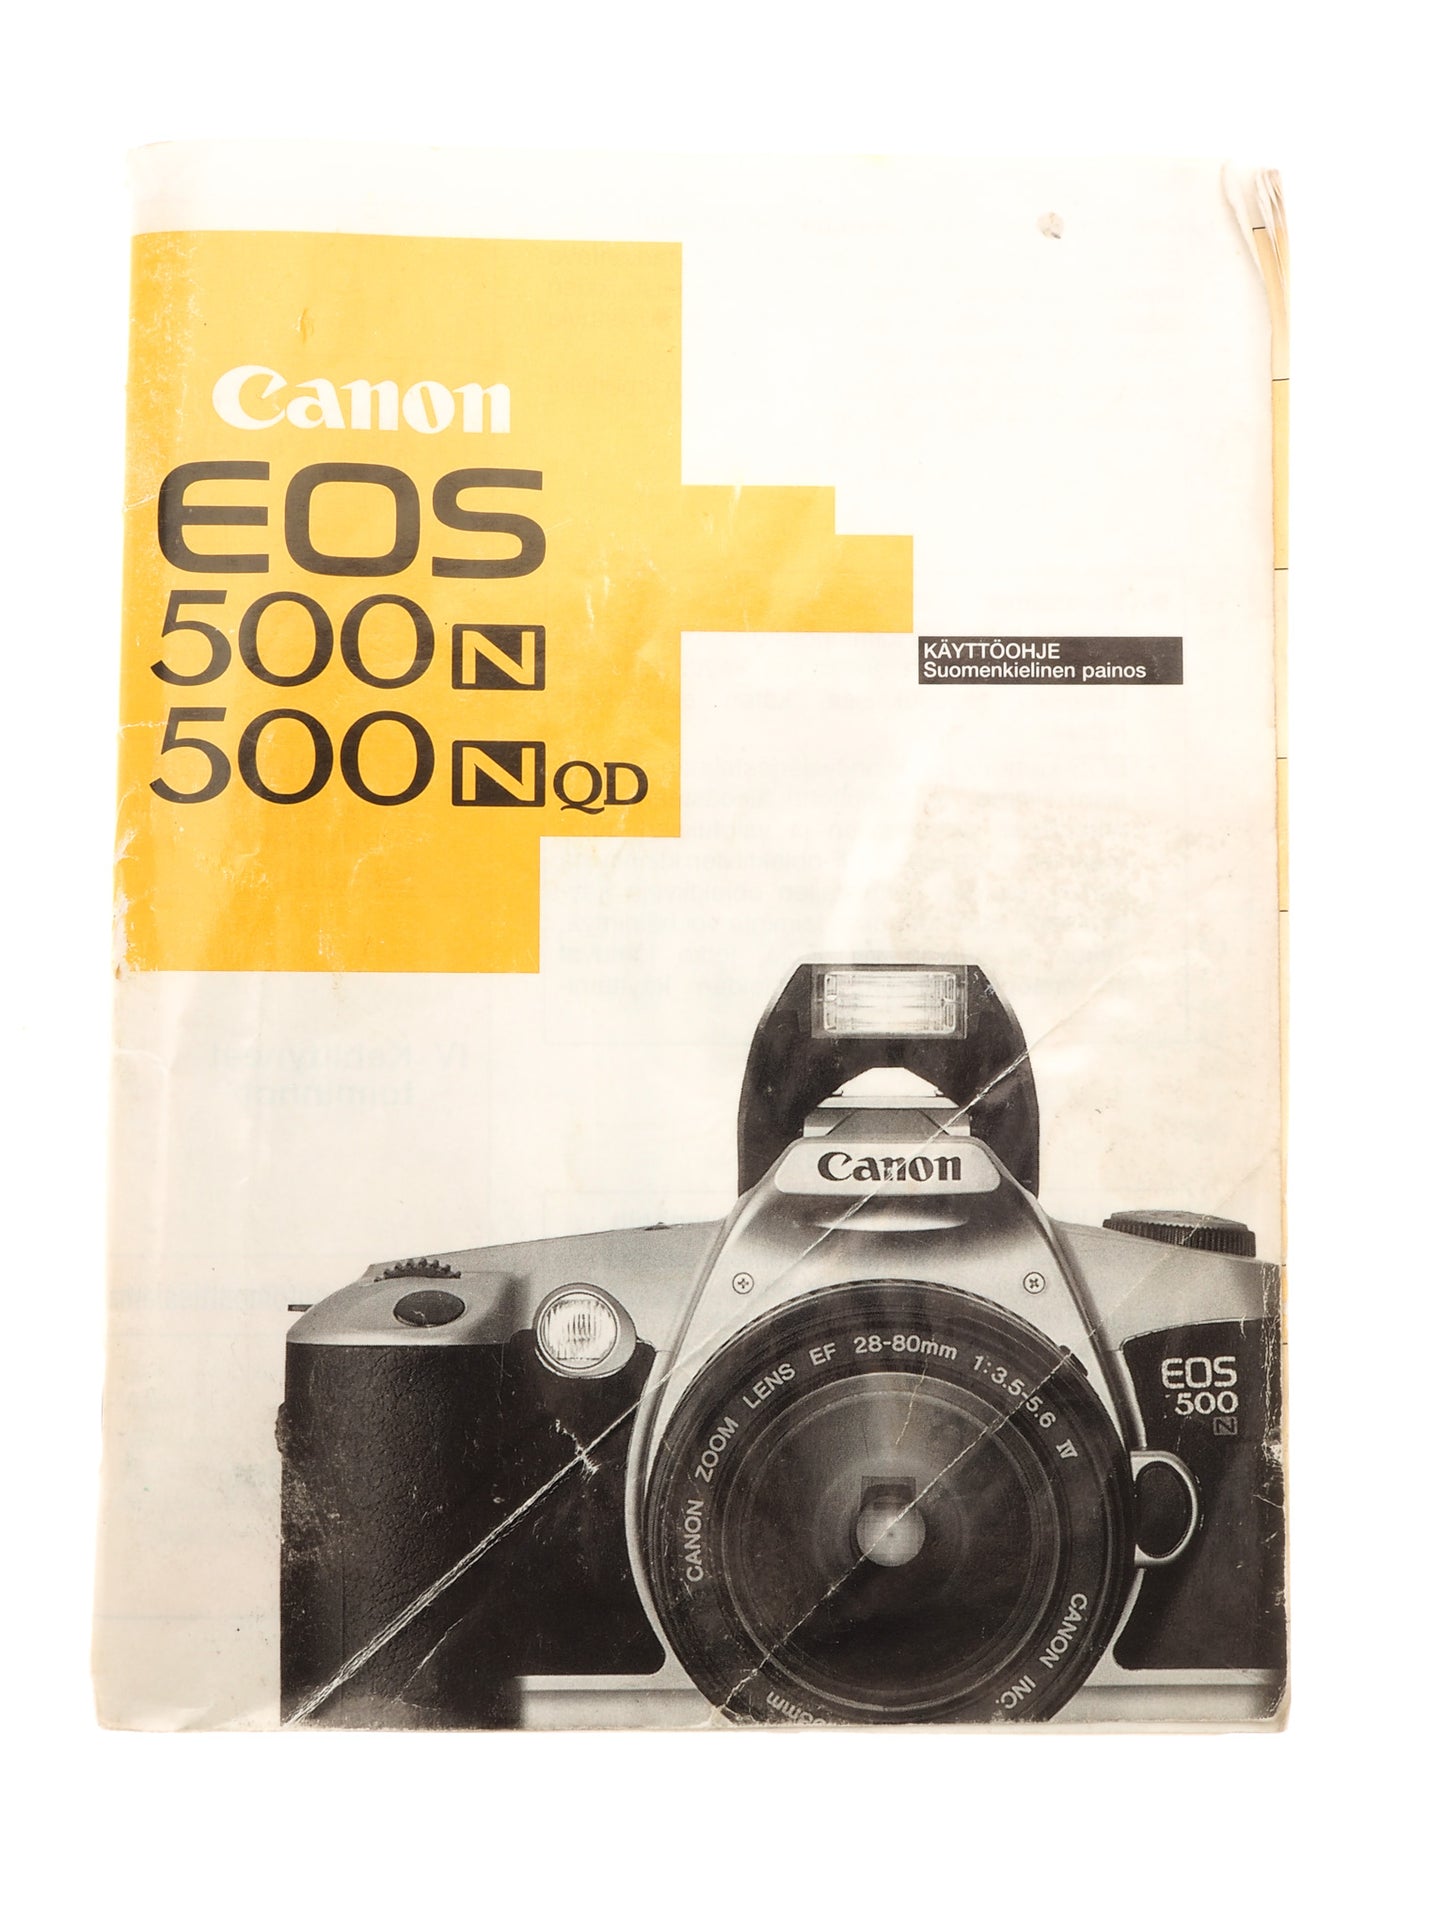 Canon EOS 500N/500NQD Instructions